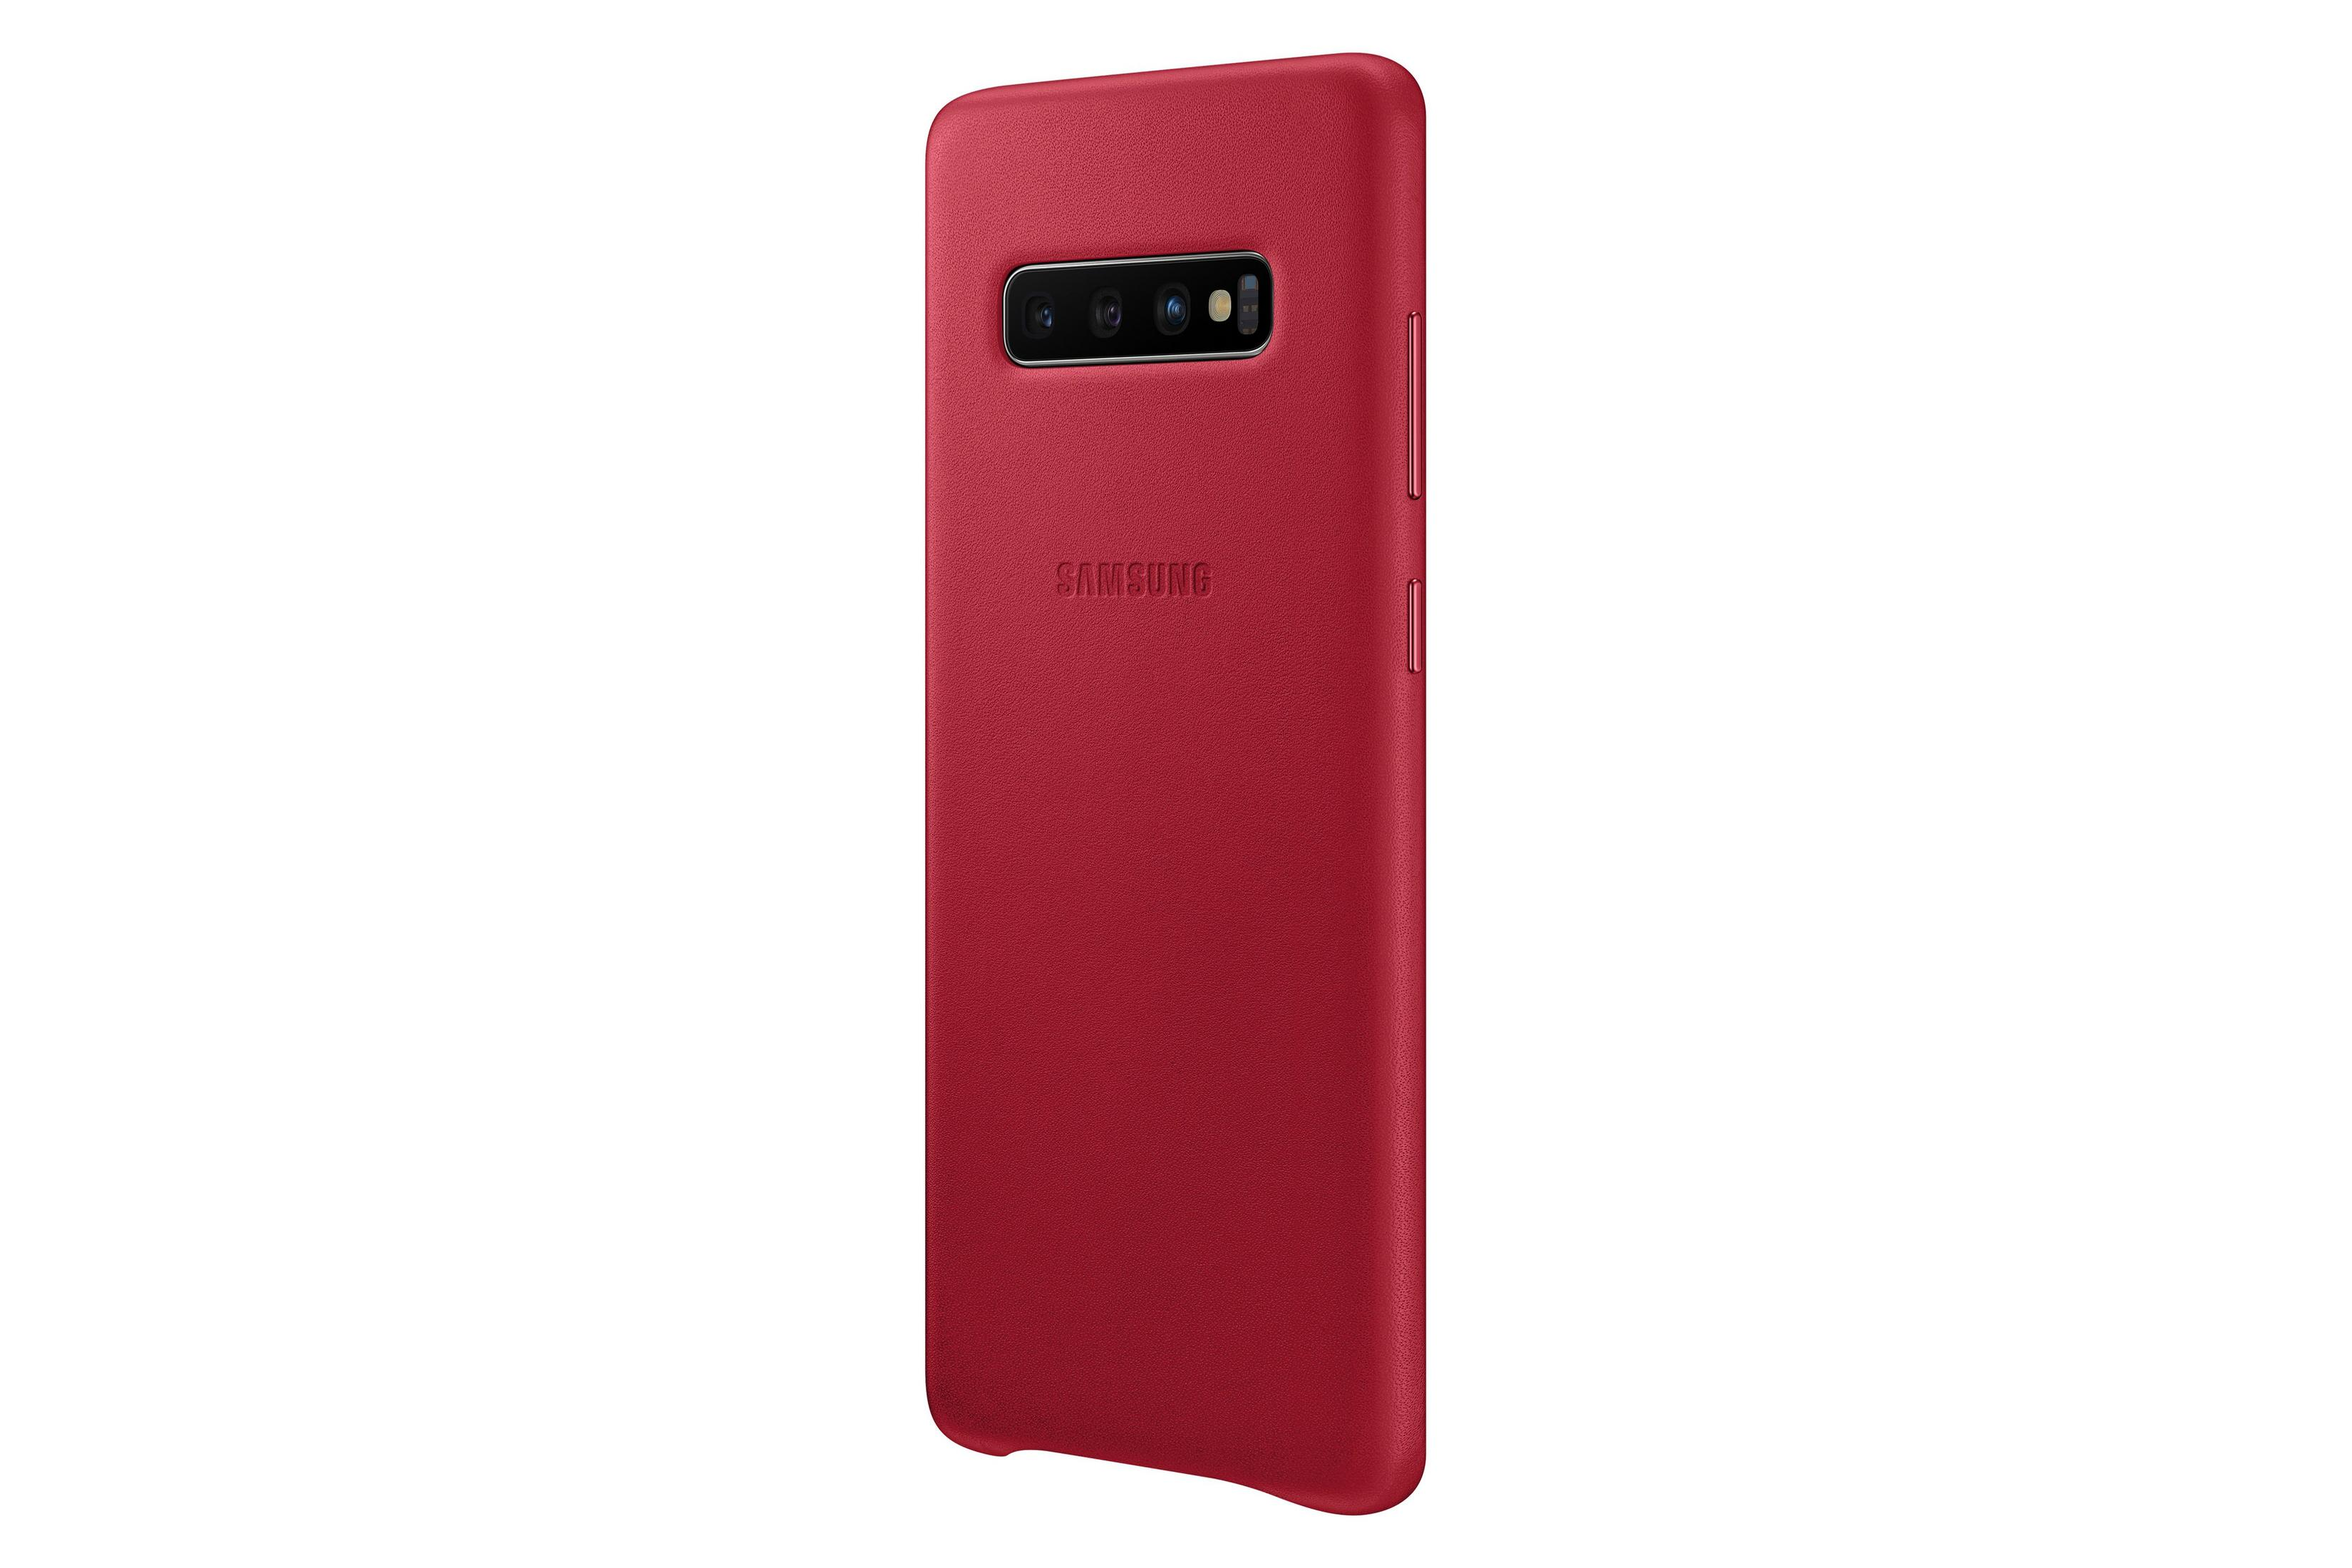 Galaxy S10+, S10+ COVER Rot Samsung, Backcover, EF-VG975LREGWW LEATHER RED, SAMSUNG